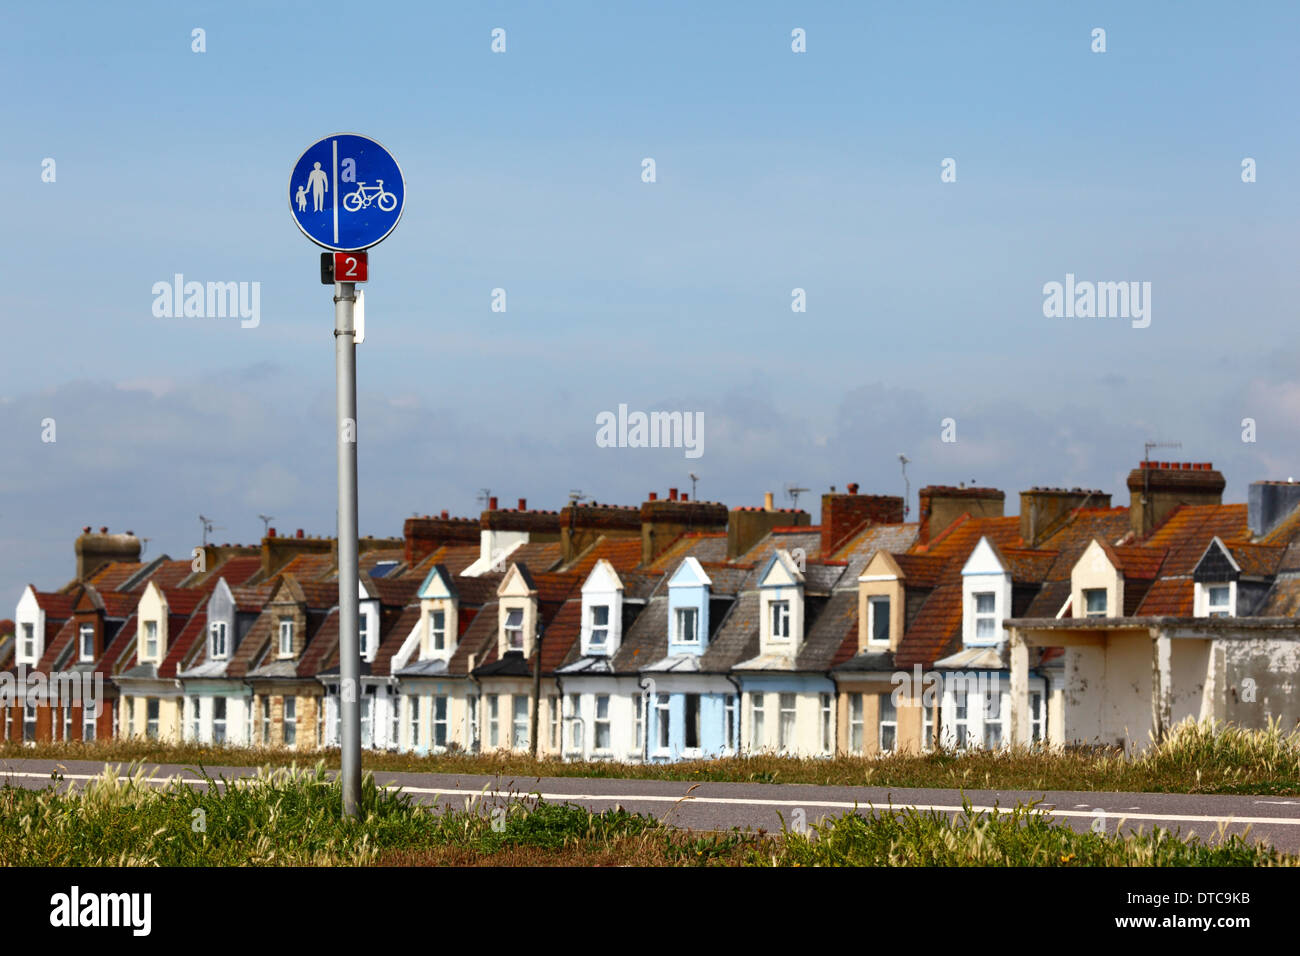 Sign on housing estate showing location of footpath and cycle lane, St Leonards on Sea, East Sussex, England Stock Photo